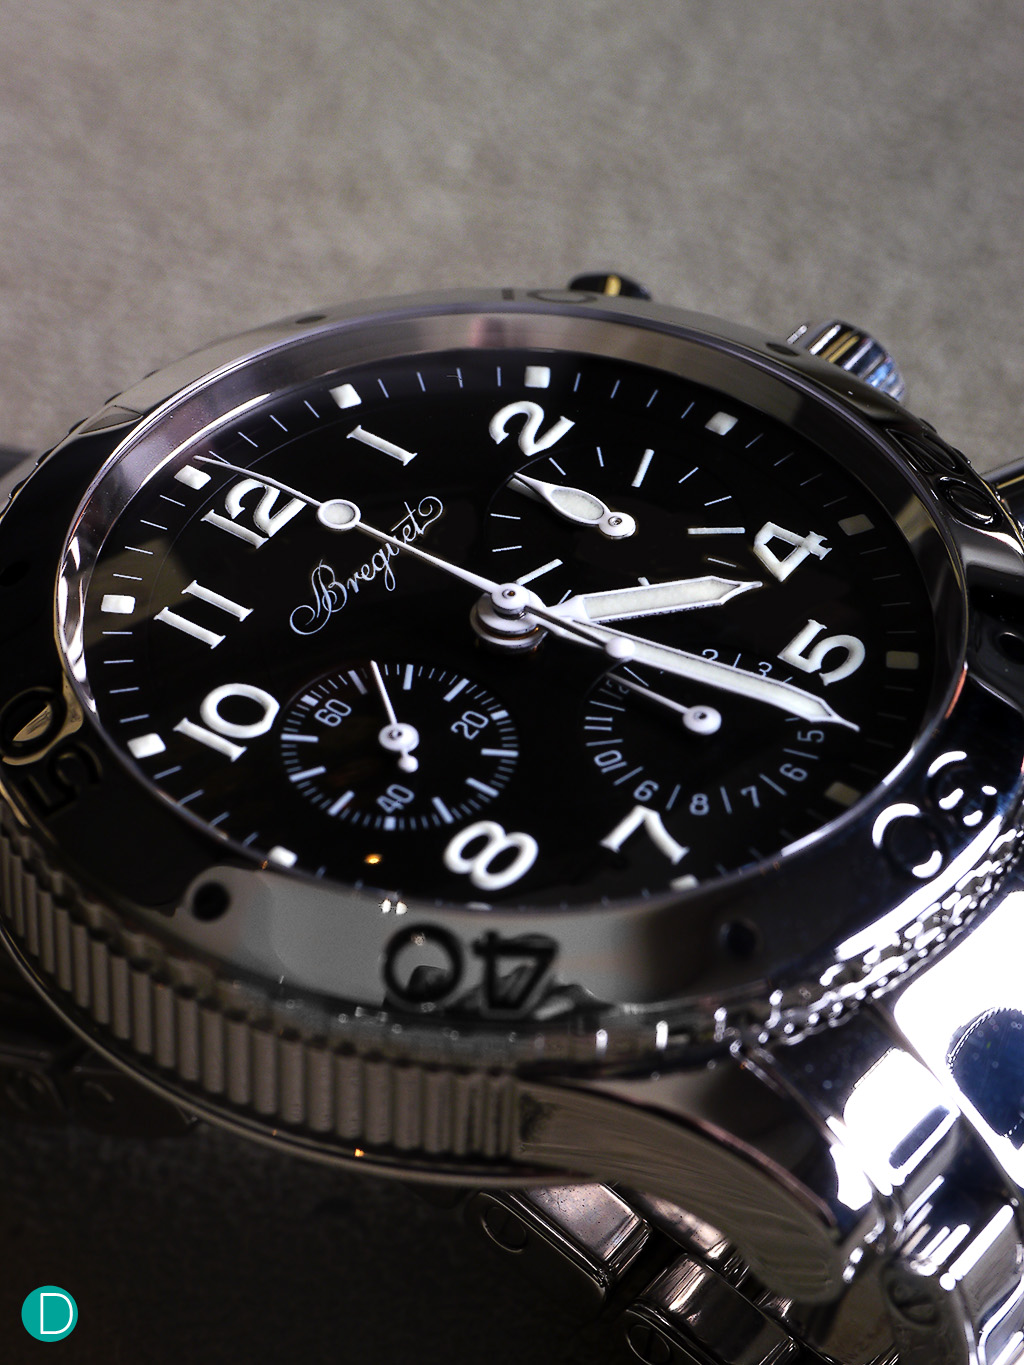 The Breguet Type XX. Not the most illustrious name in the Breguet lineup, but it is certainly a damn good piece of watch. 